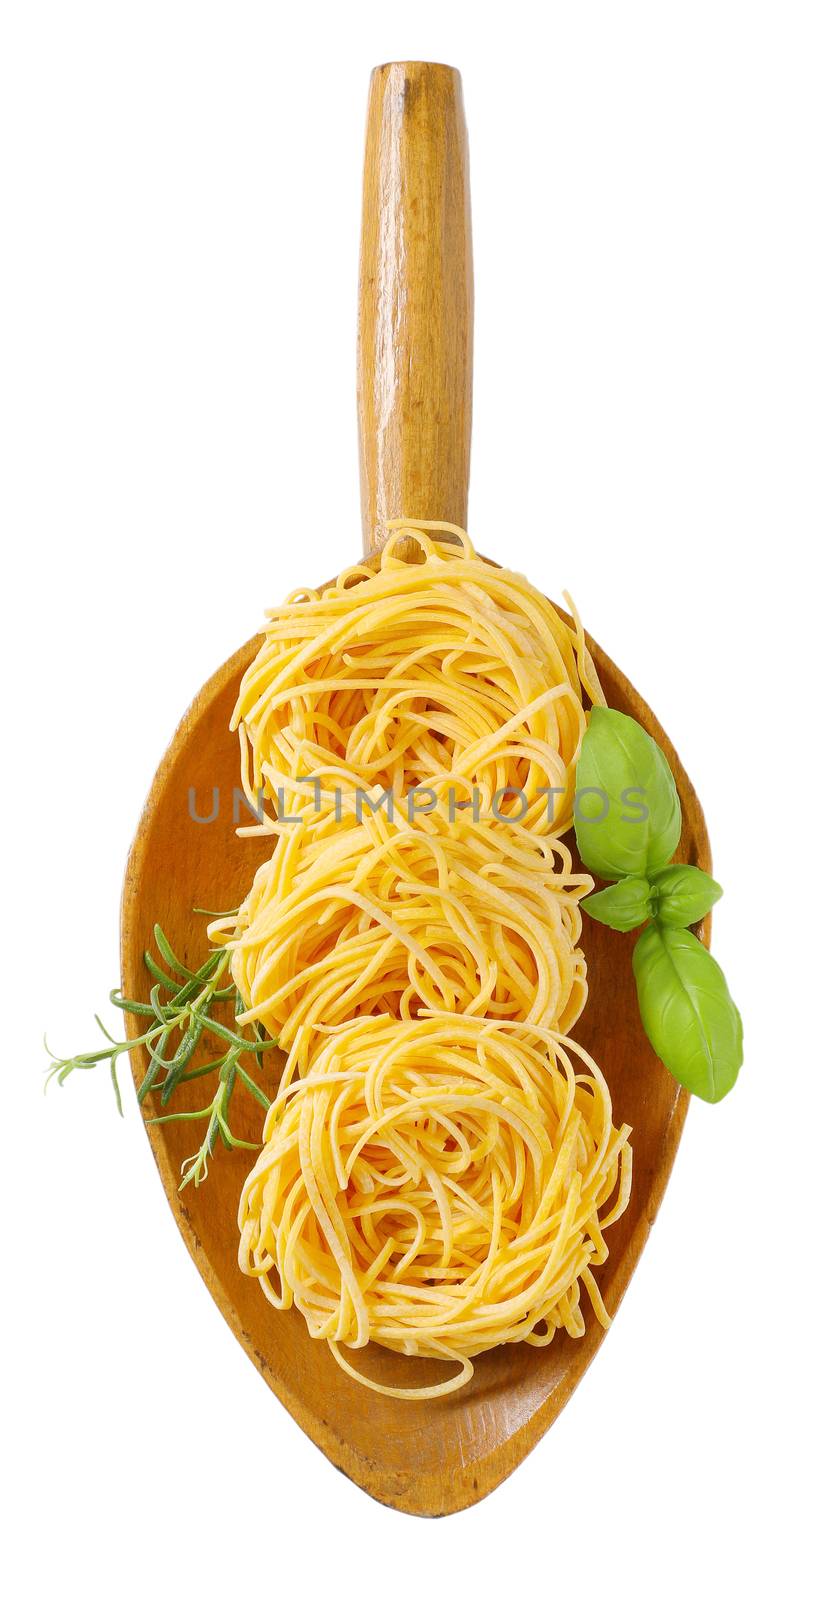 bundles of spaghetti pasta and herbs in wooden scoop